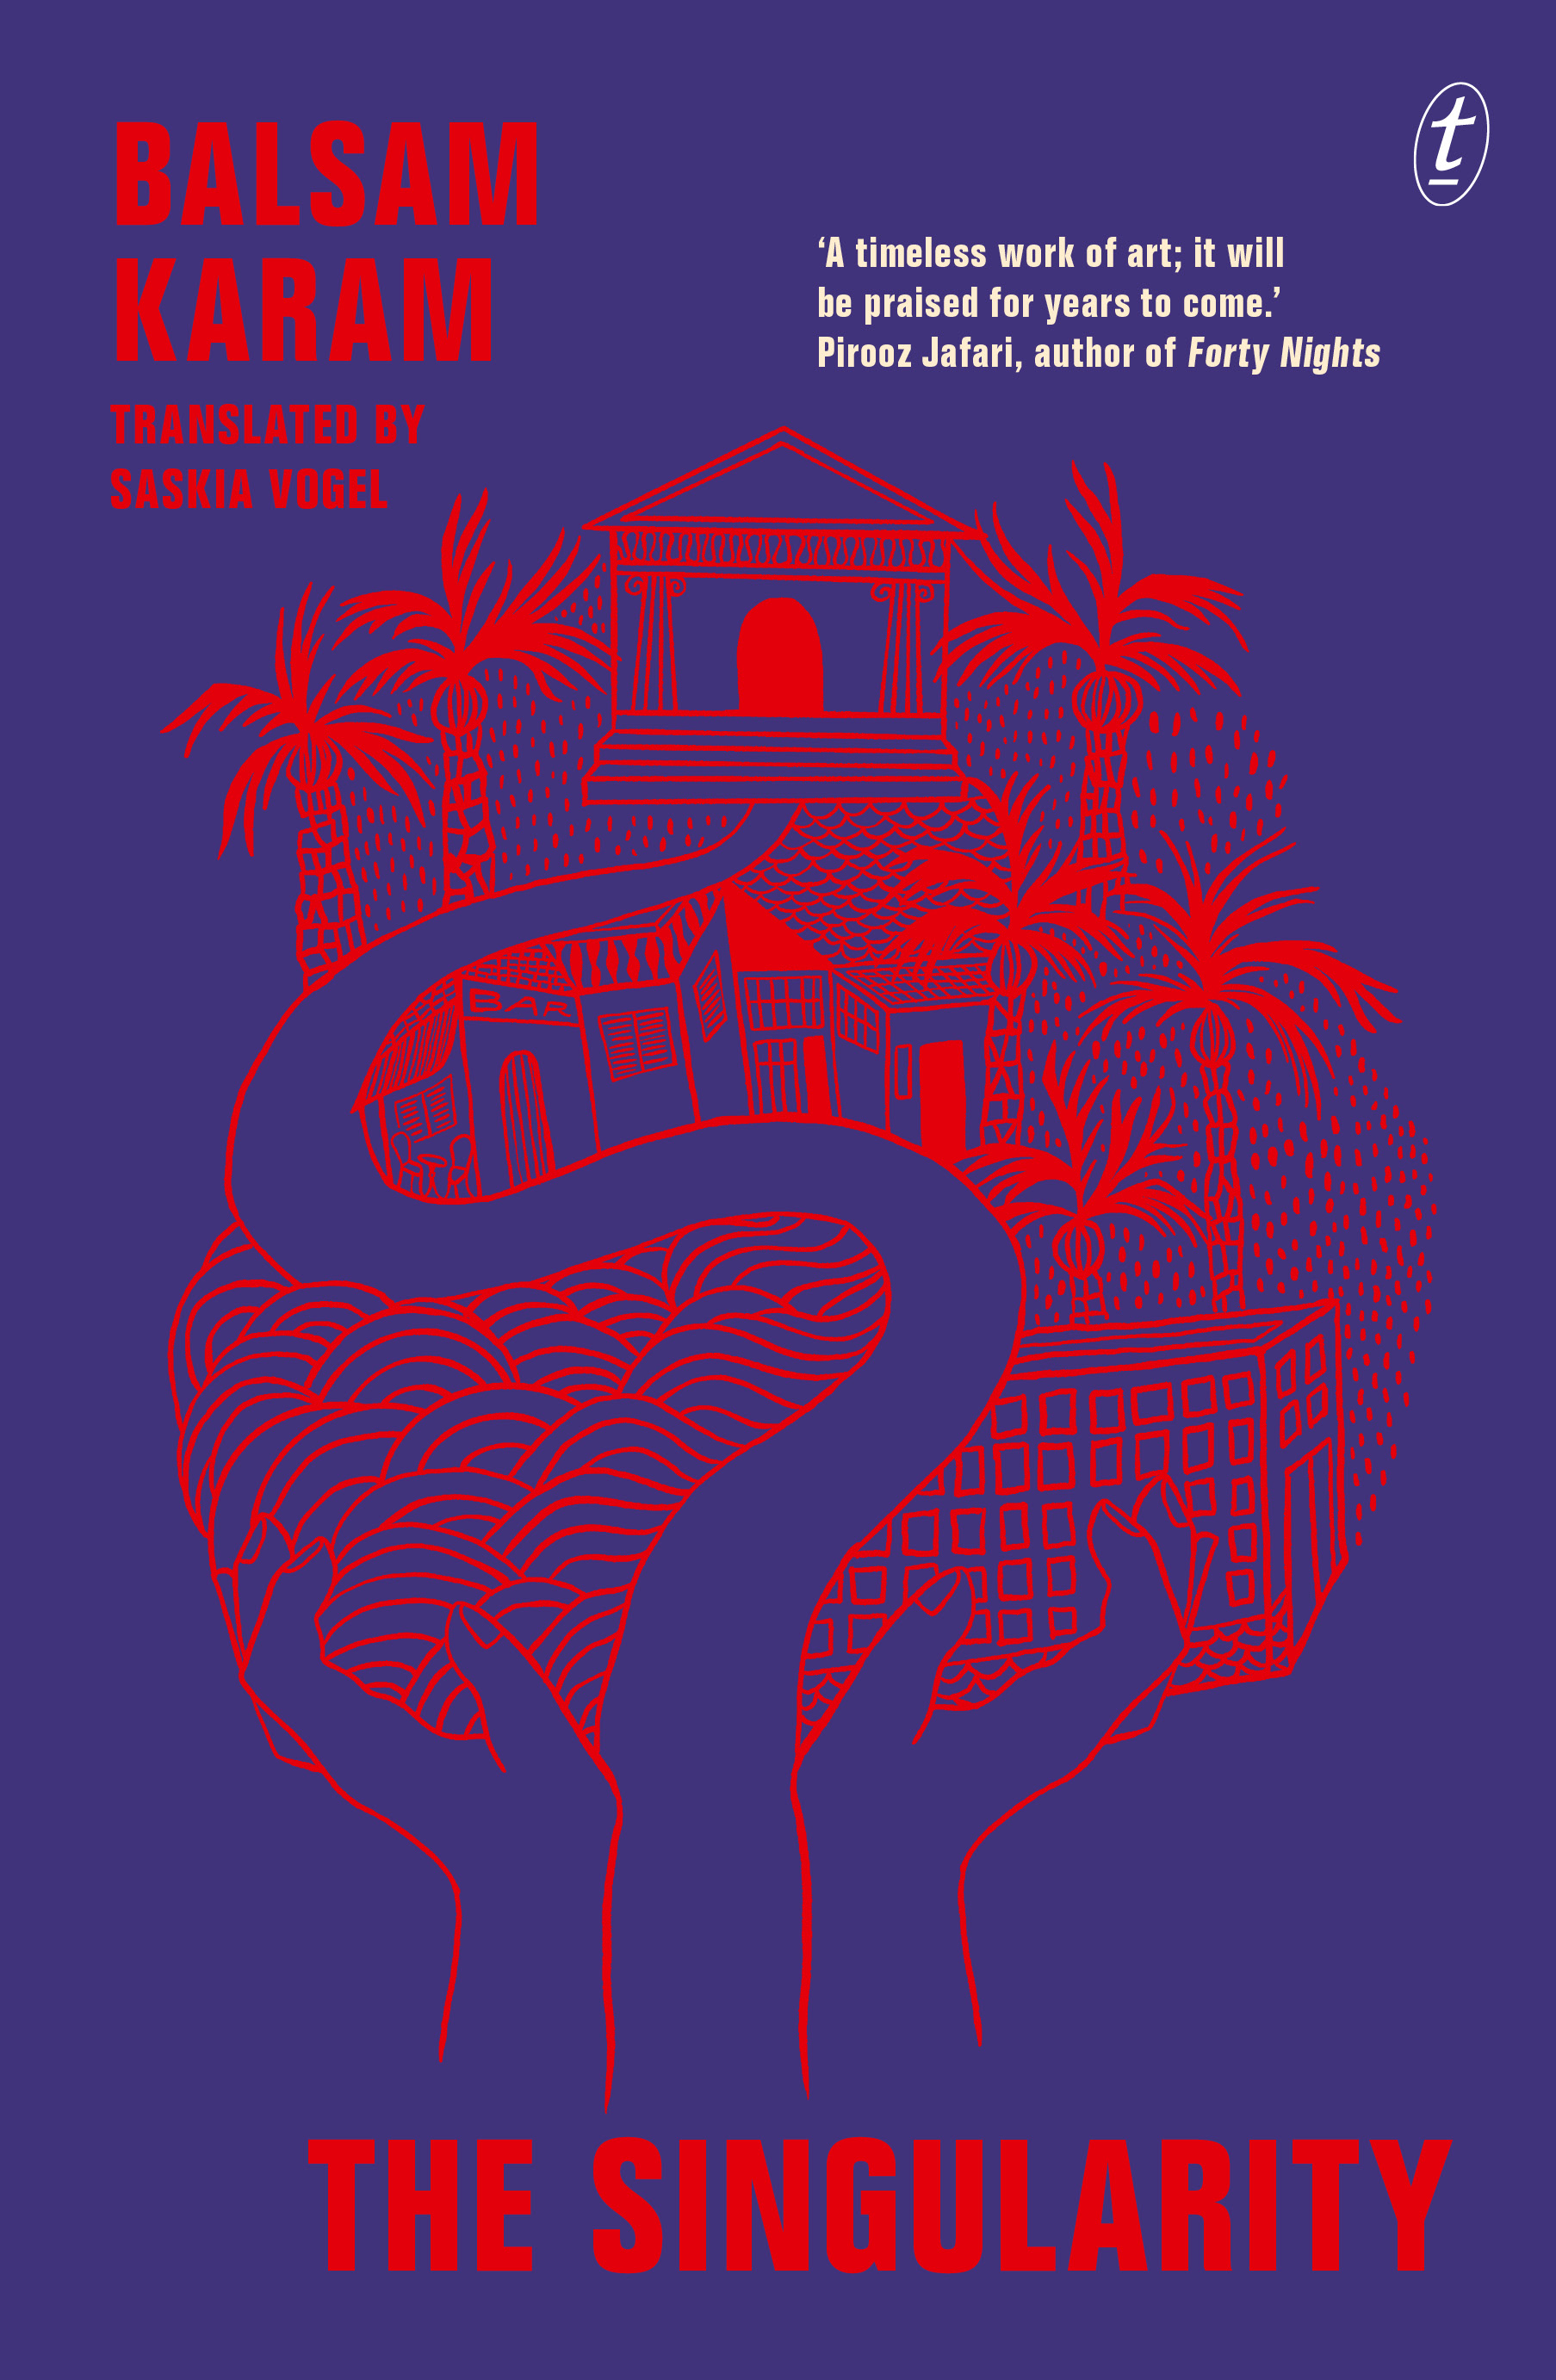 A book cover with a red text and an illustration of a path leading to a hut surrounded by palms against a deep blue background